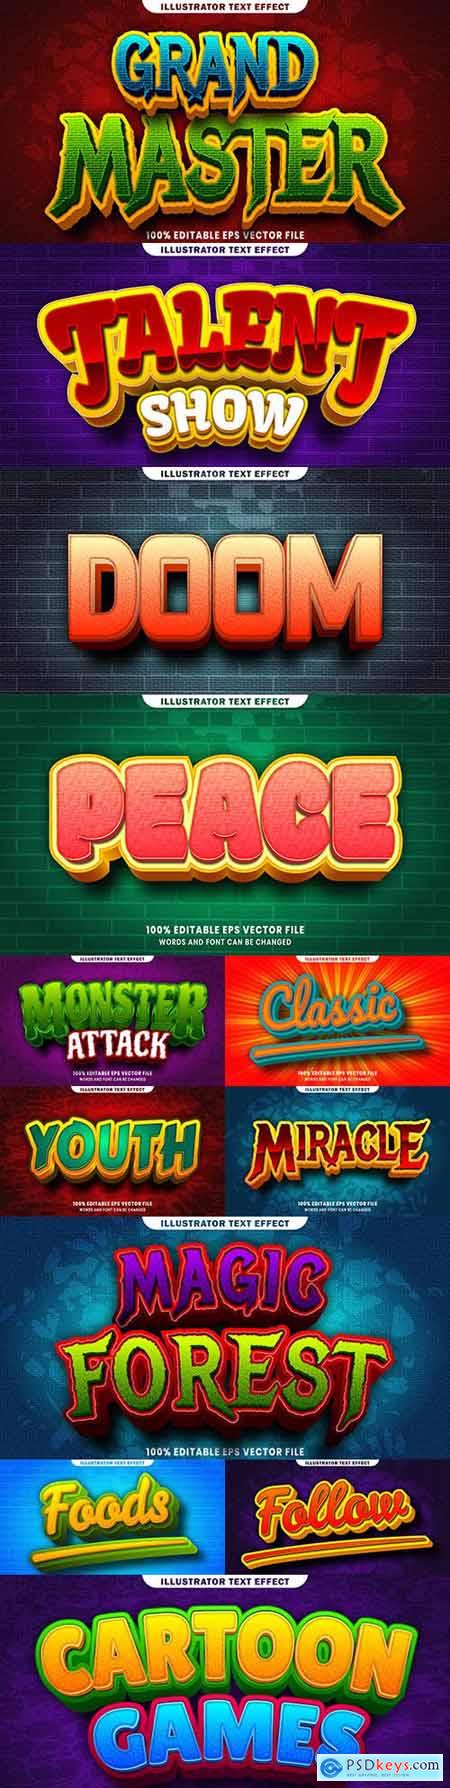 Editable font and 3d effect text design collection illustration 51